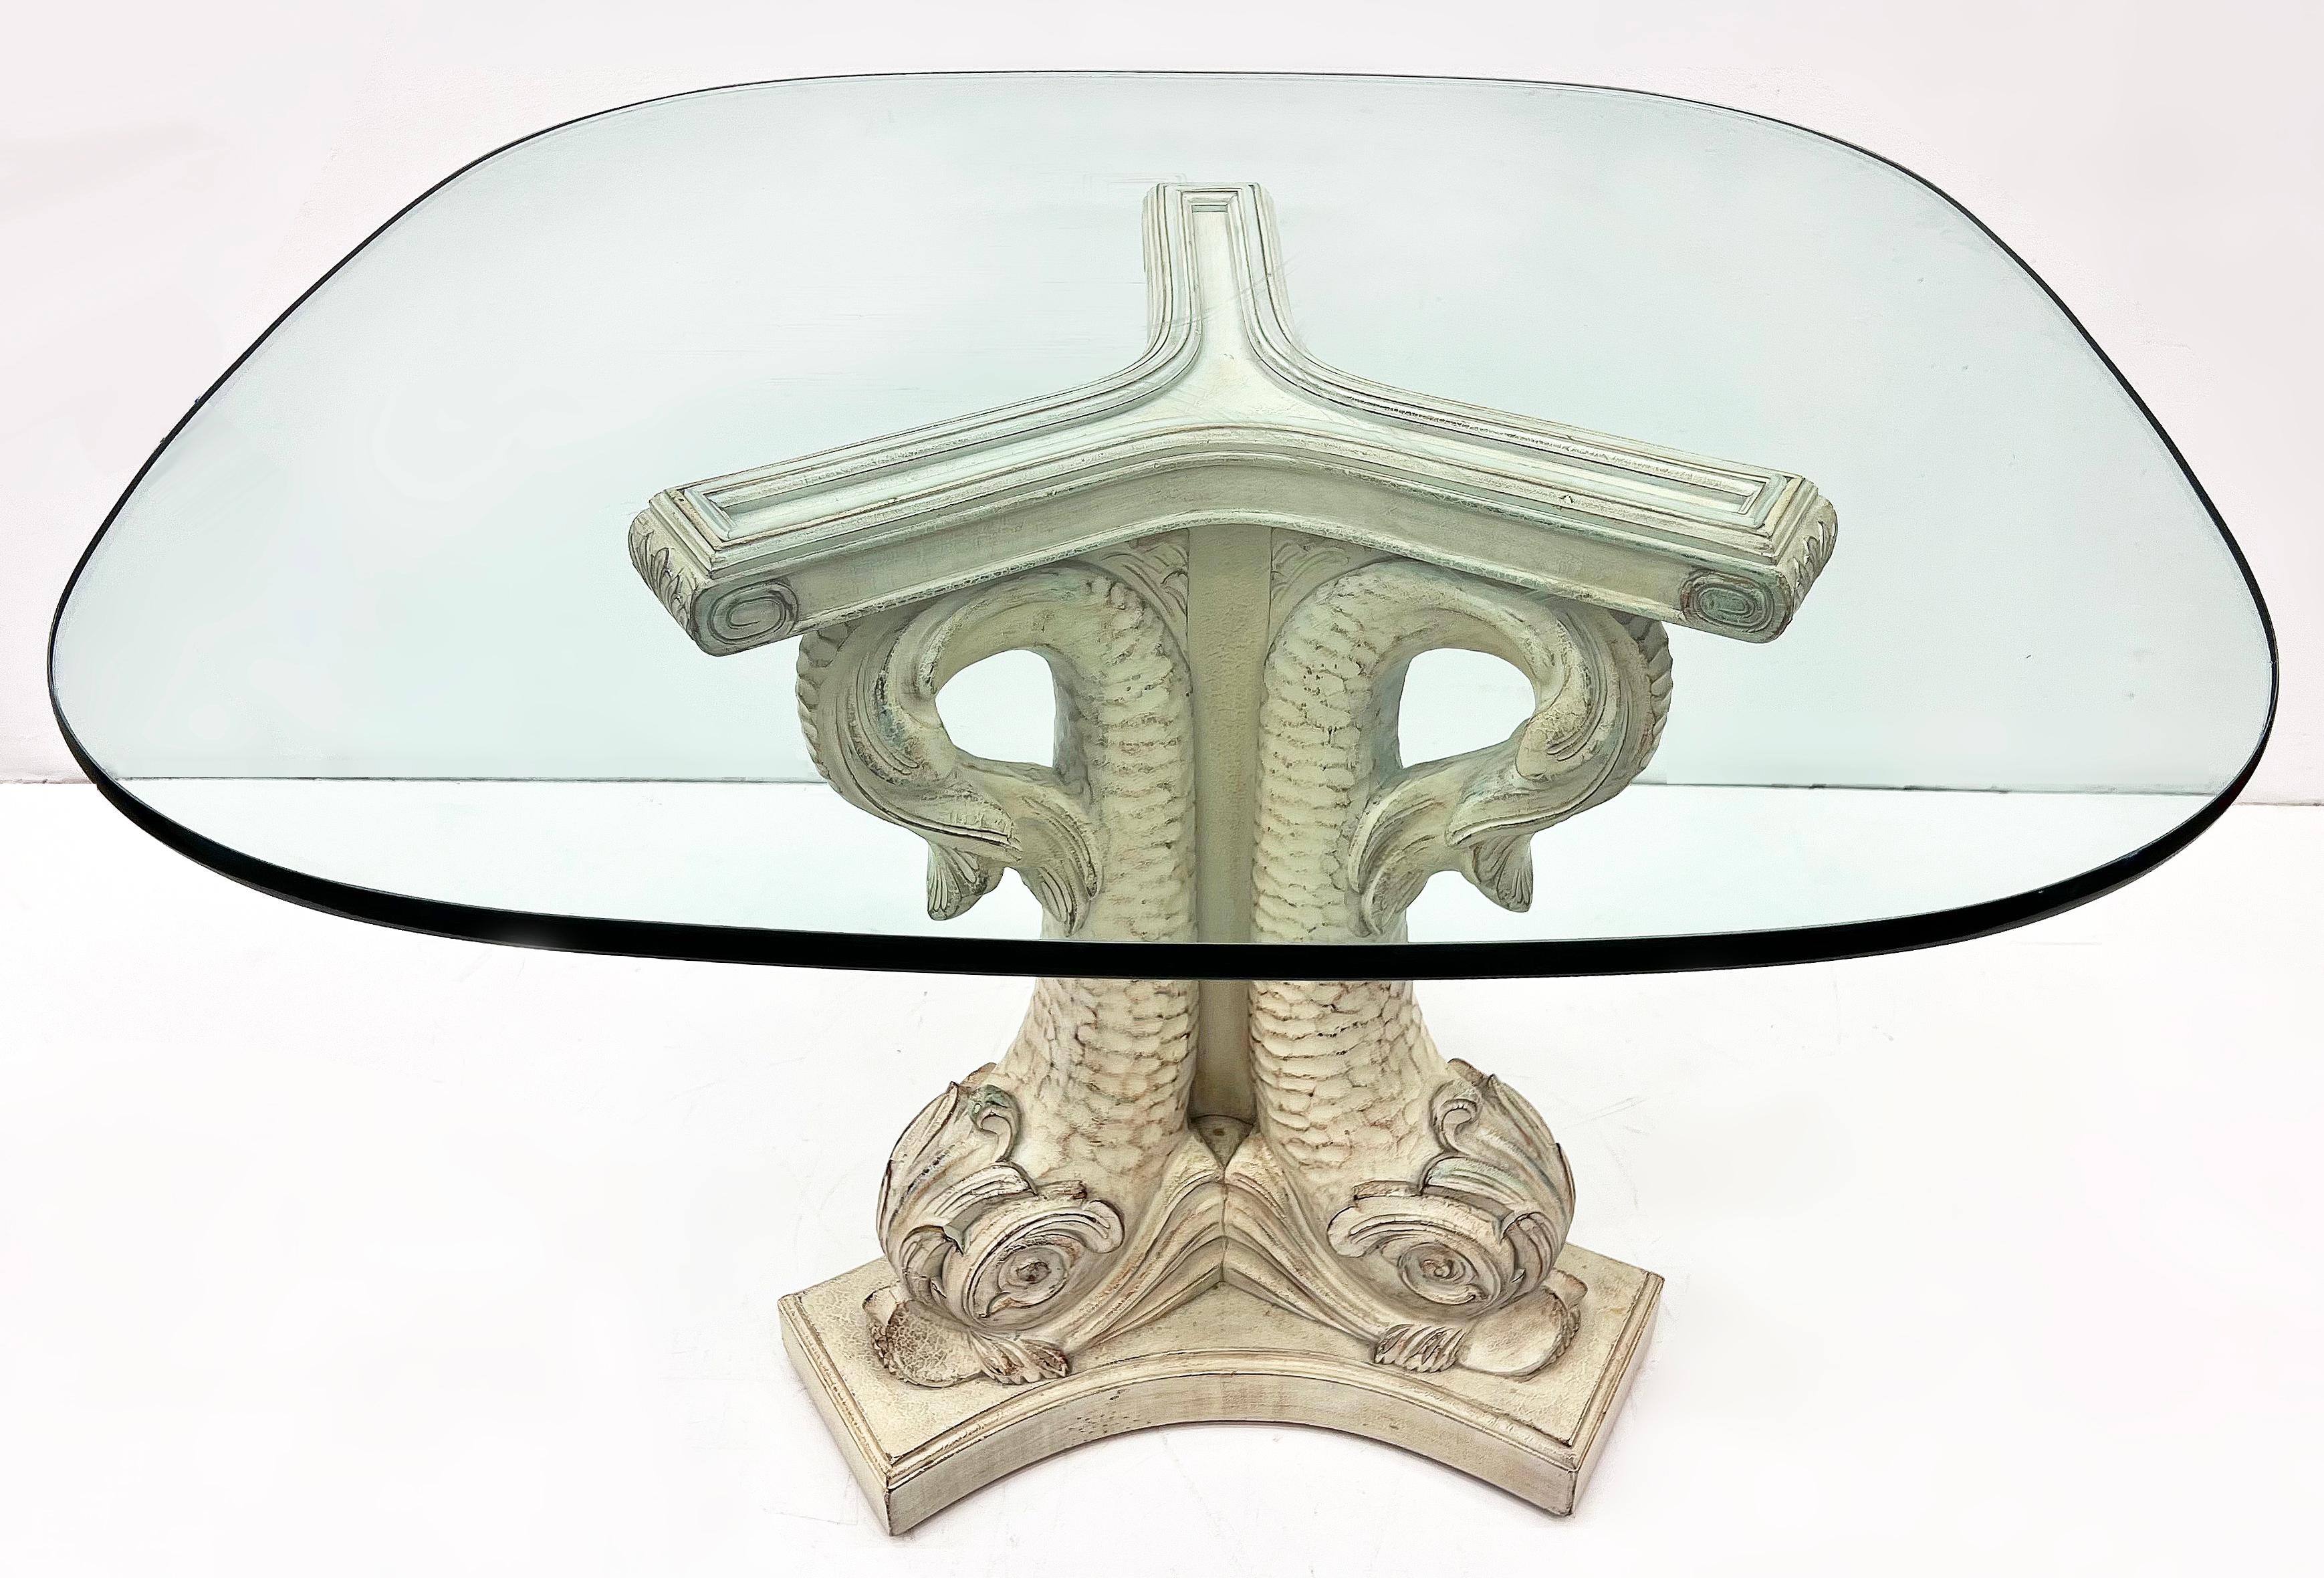 Neoclassical style carved Dolphins Venetian Gueridon table with glass top

Offered for sale is a vintage neoclassical style carved wood Venetian gueridon pedestal table with dolphins. The table is elegantly carved and was made in Spain. It is